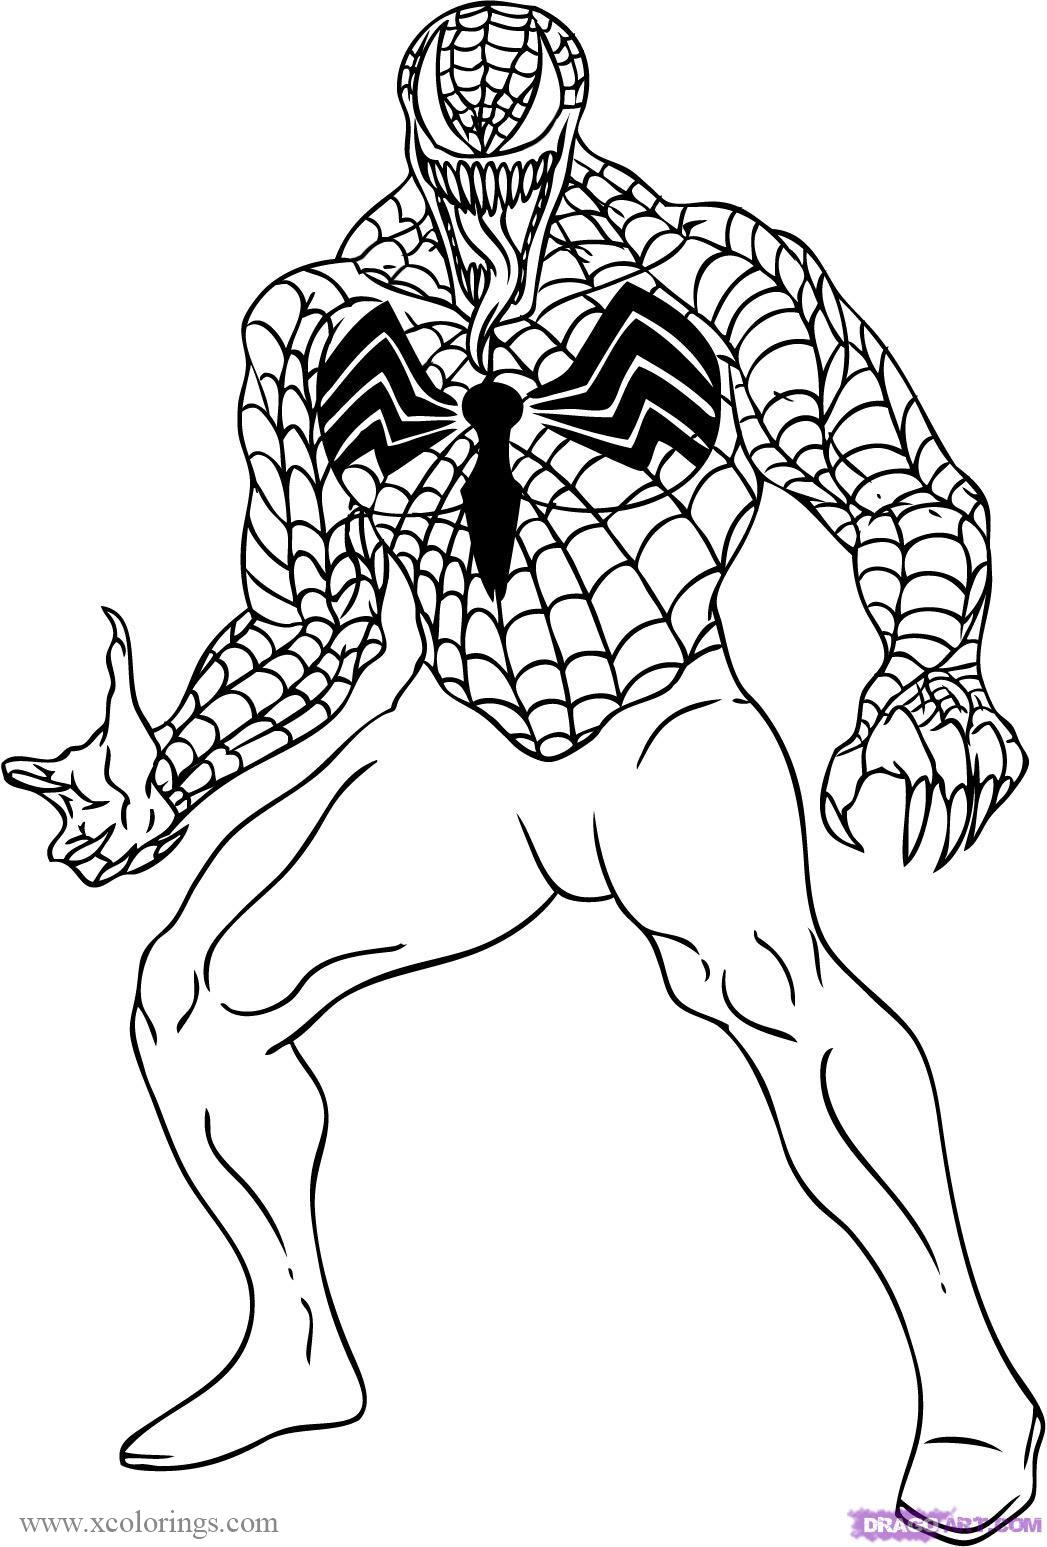 Free Supervillain Carnage Coloring Pages printable